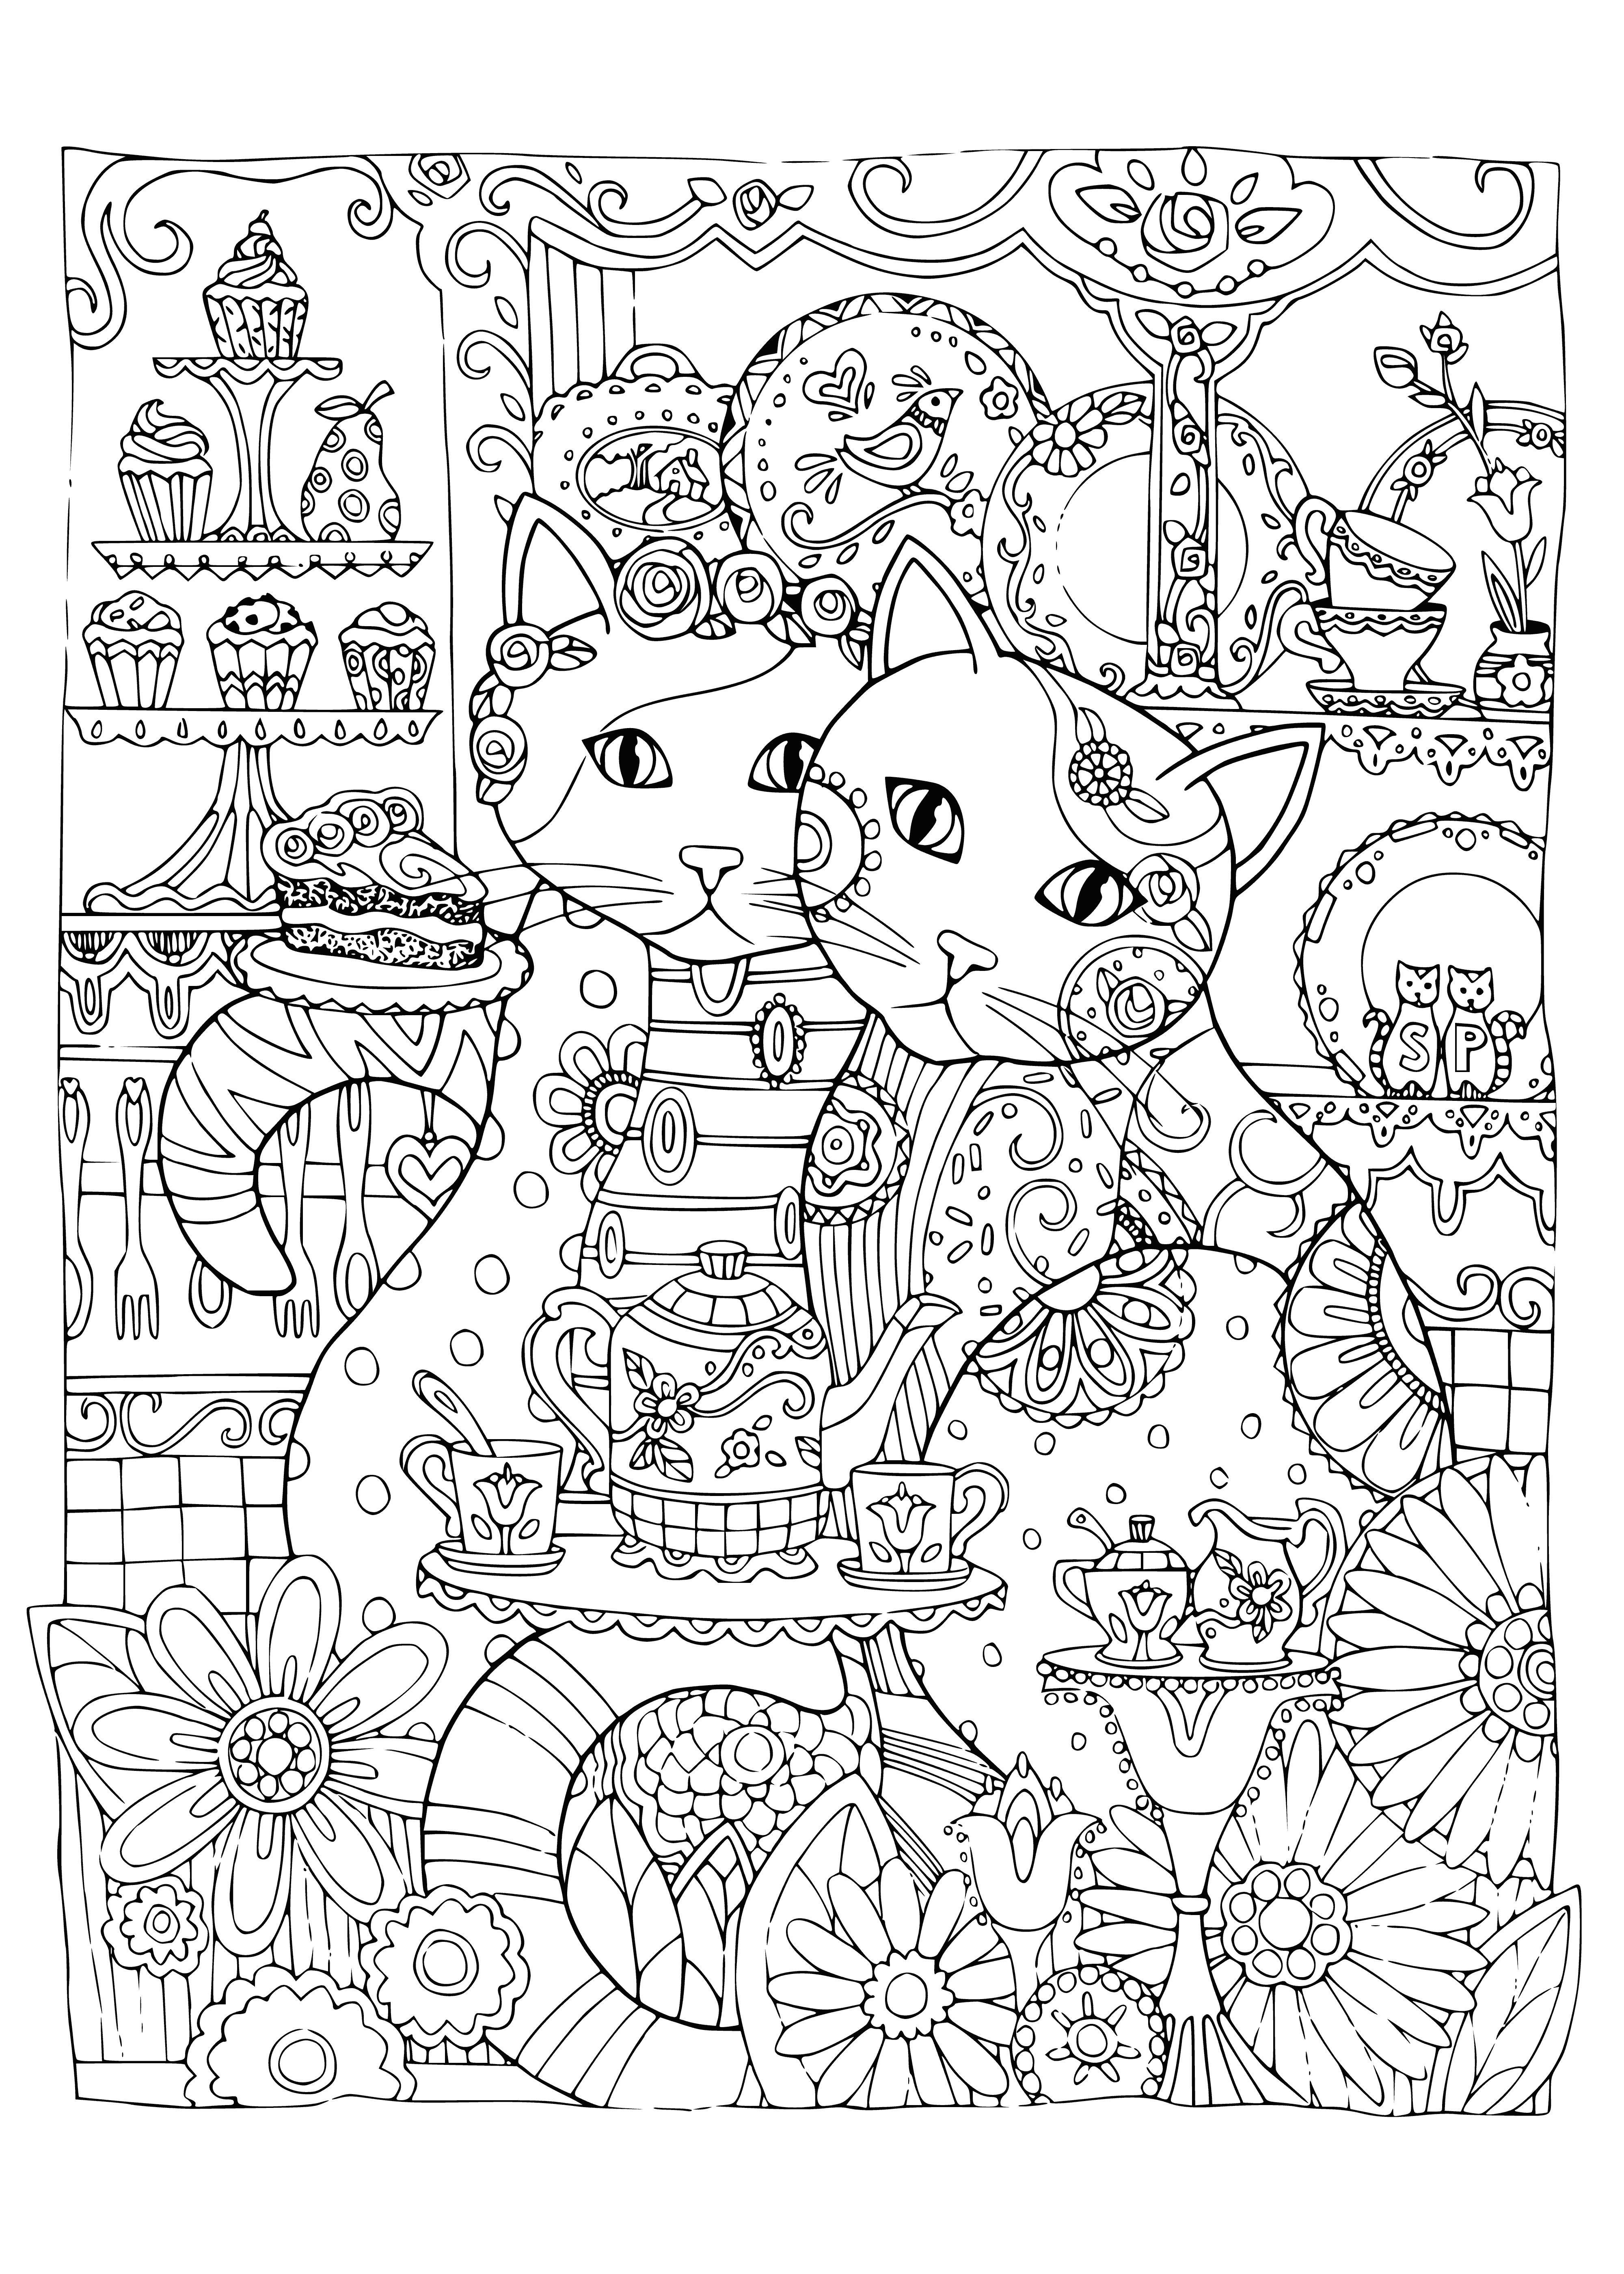 Cats in a cafe coloring page